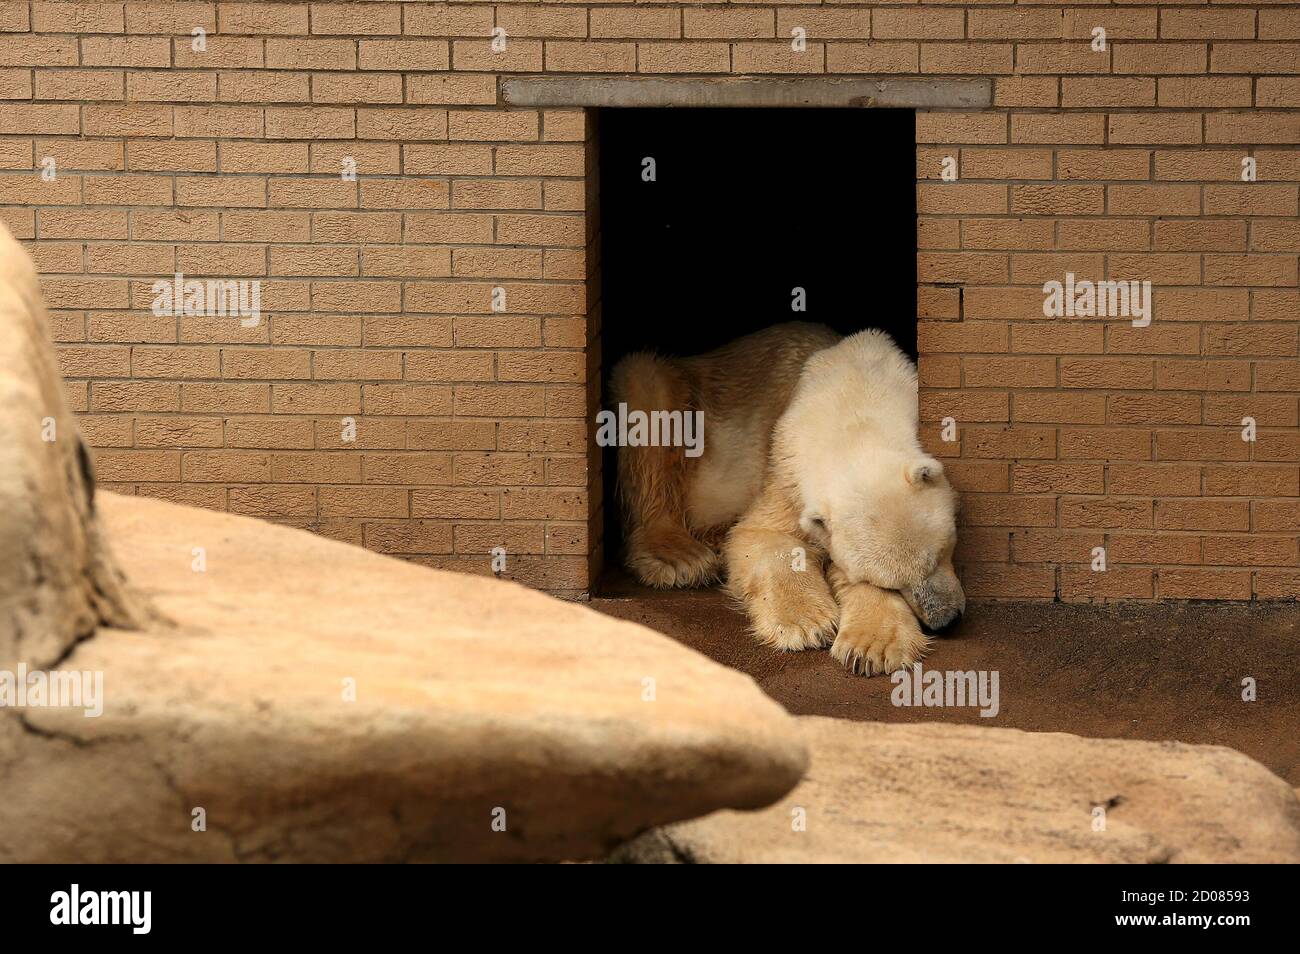 Wang, the only polar bear in Africa, reacts as he mourns the death of his companion, Geebee, for the past two weeks at the Johannesburg Zoo, January 31, 2014. The 30-year-old Geebee was found dead in the pool of her Johannesburg Zoo enclosure after a heart attack this month. The two had been partners since they arrived at the South African zoo in 1985, barely a year old.  REUTERS/Siphiwe Sibeko (SOUTH AFRICA - Tags: SOCIETY) Stock Photo